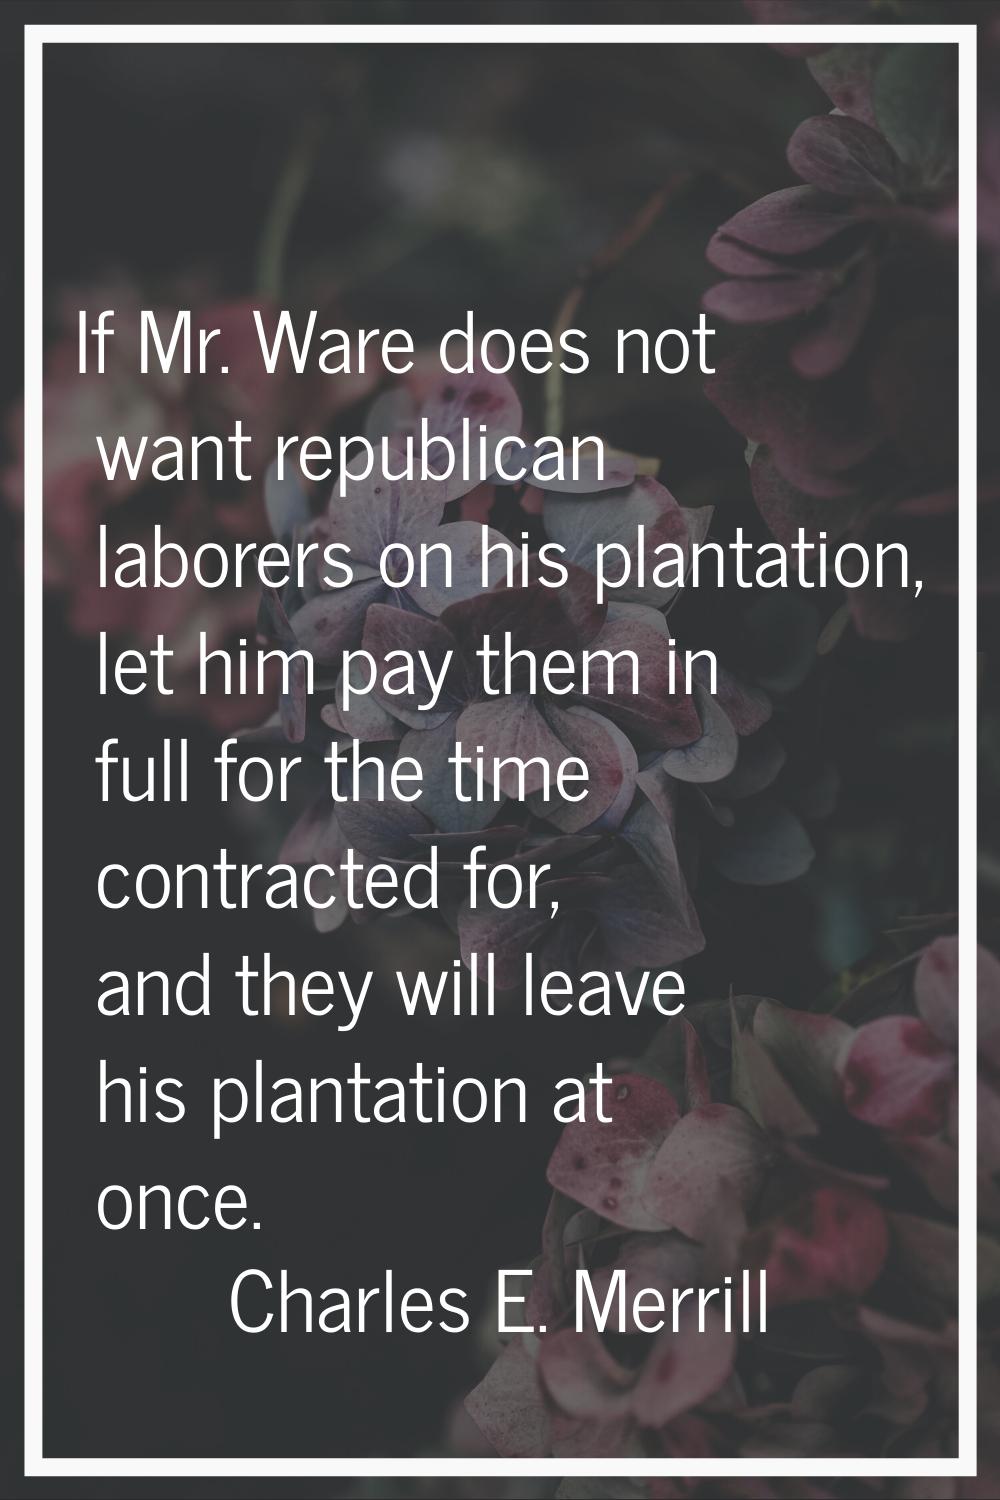 If Mr. Ware does not want republican laborers on his plantation, let him pay them in full for the t